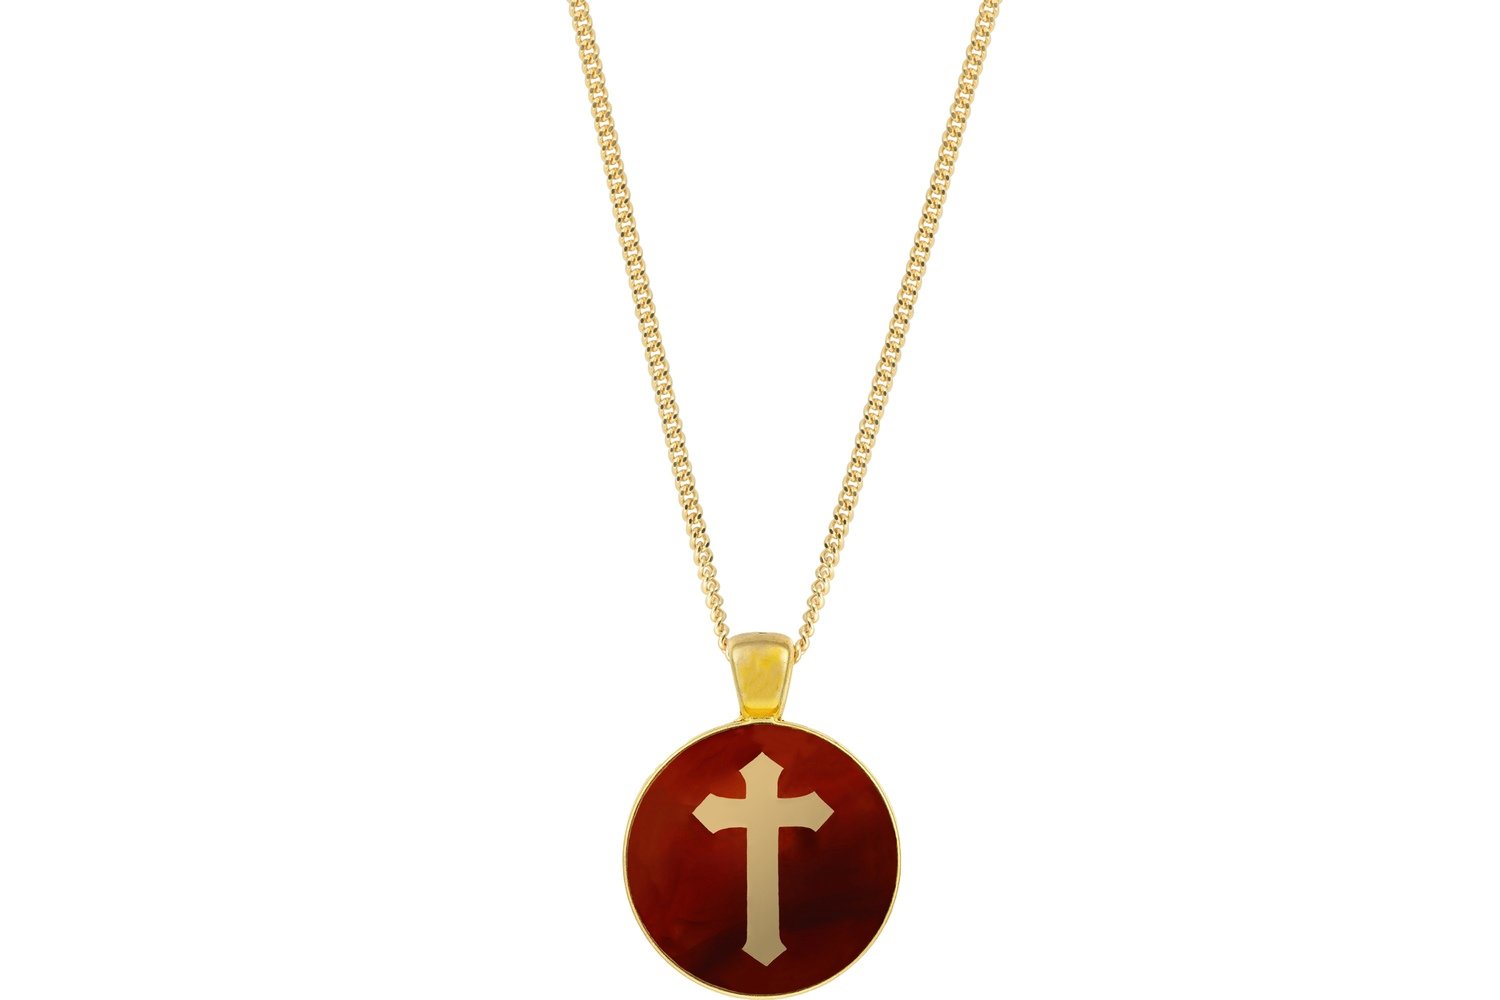 Cross Pendant Intricate Style on Chain Necklace